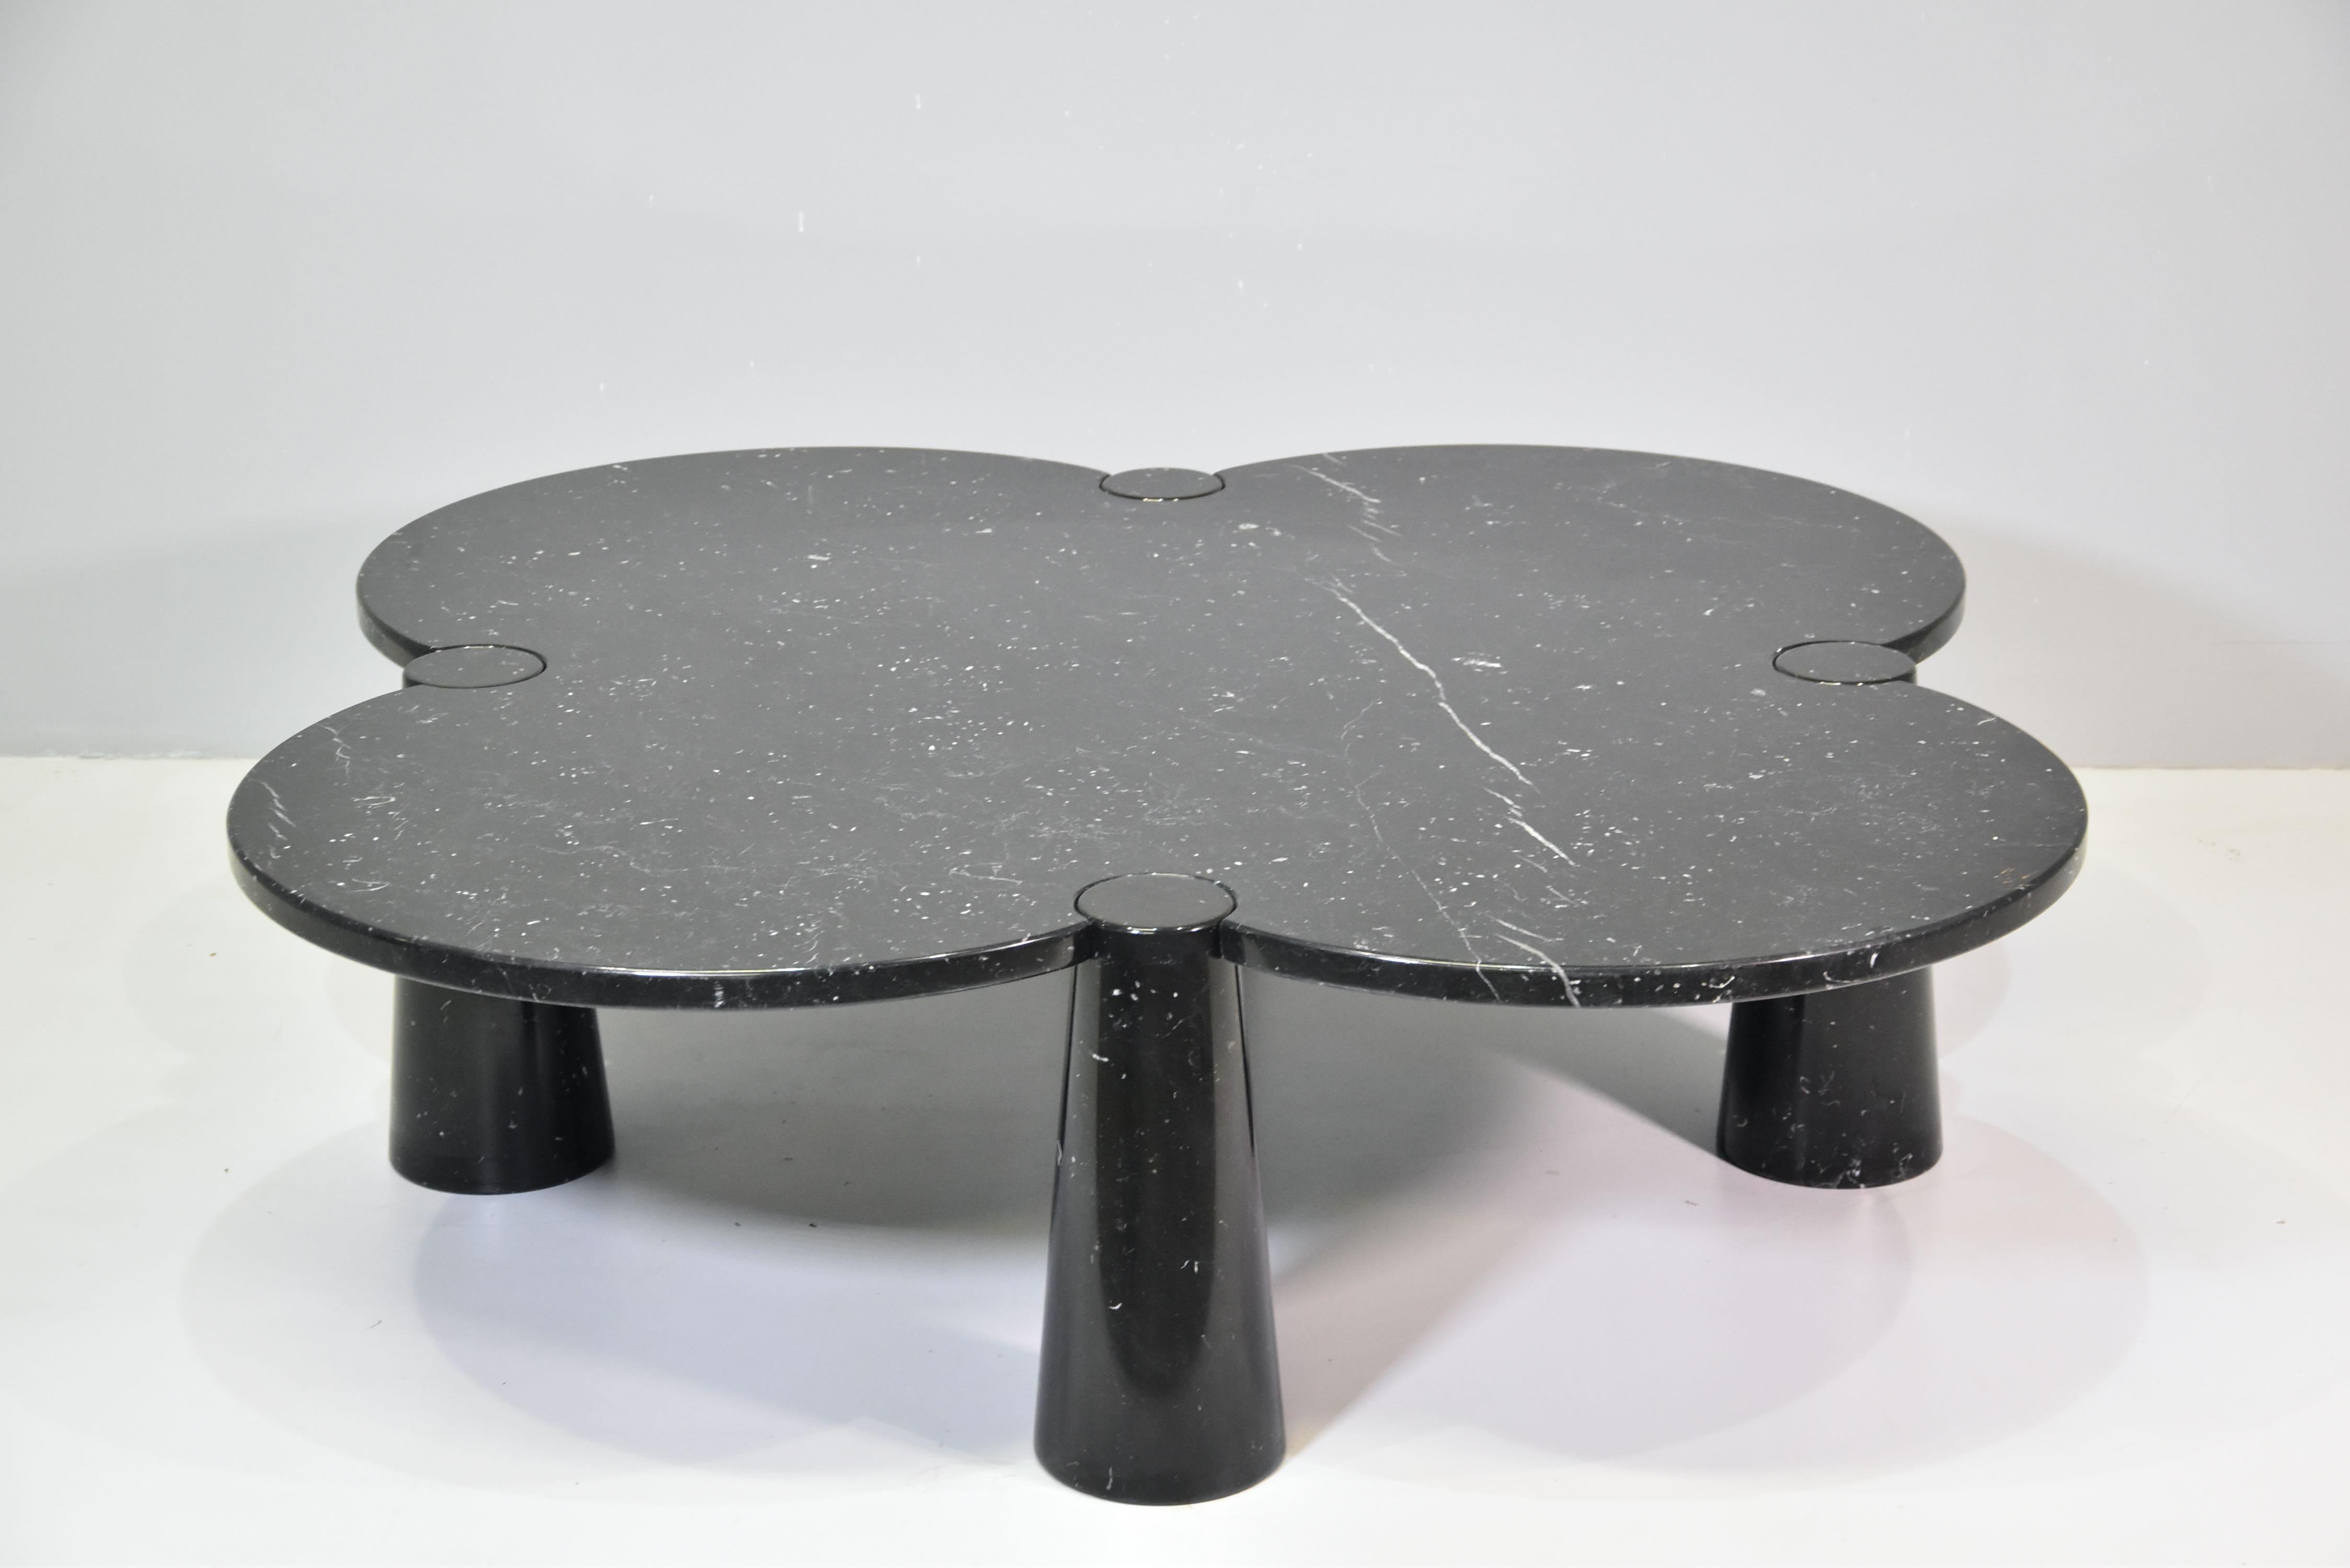 Angelo Mangiarotti’s (1921-2012) central philosophy as an architect was to create forms that responded directly to the material’s properties. 
The weight of marble inspired him to create the quadrifoglio series of tables in the 1970s for Skipper.